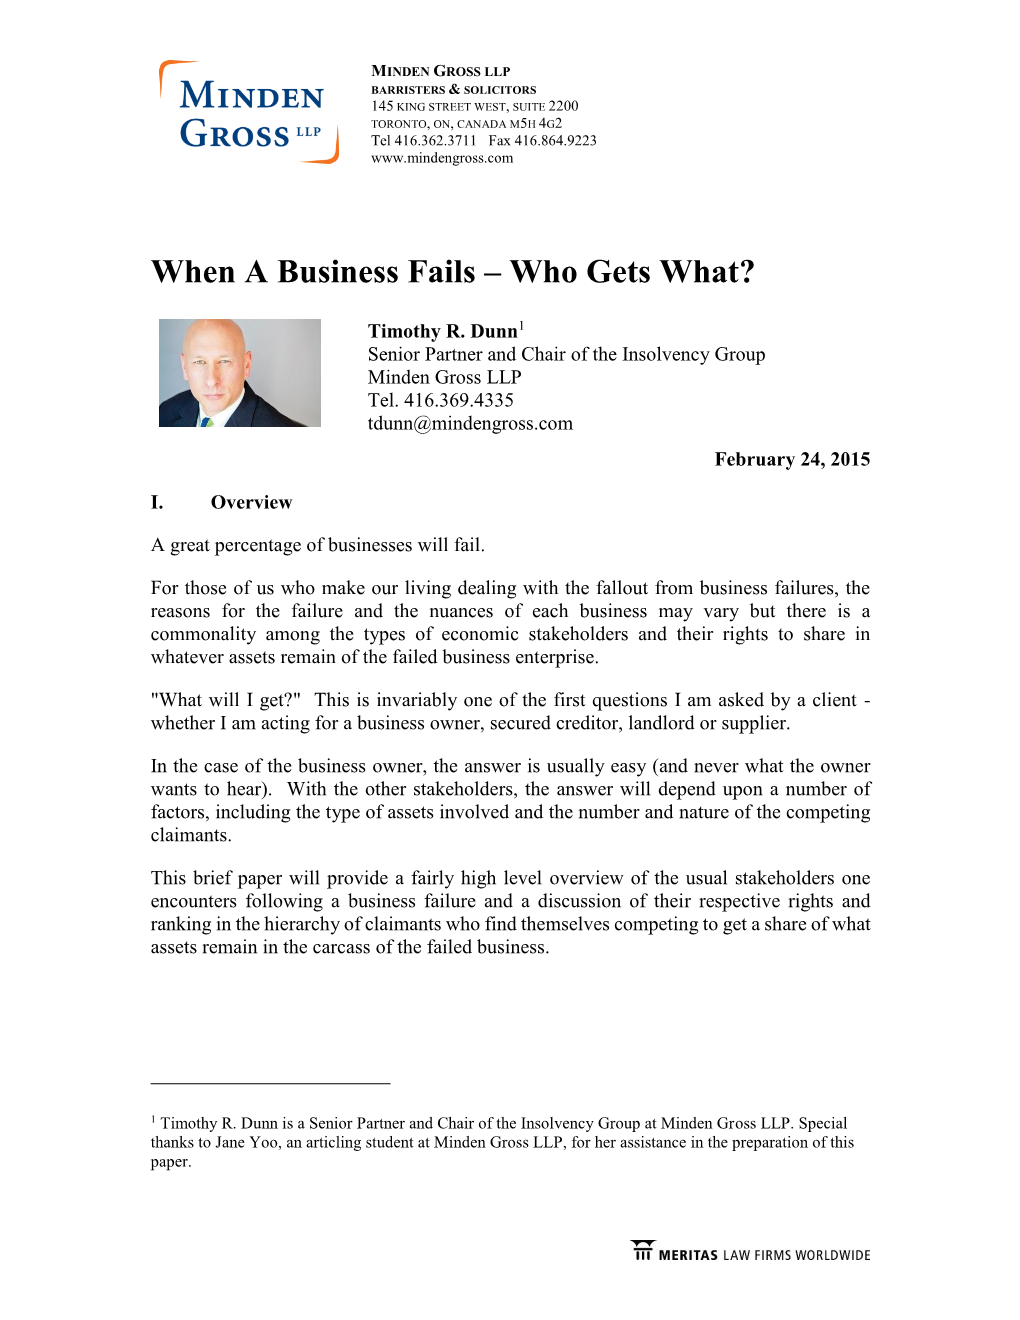 When a Business Fails – Who Gets What?